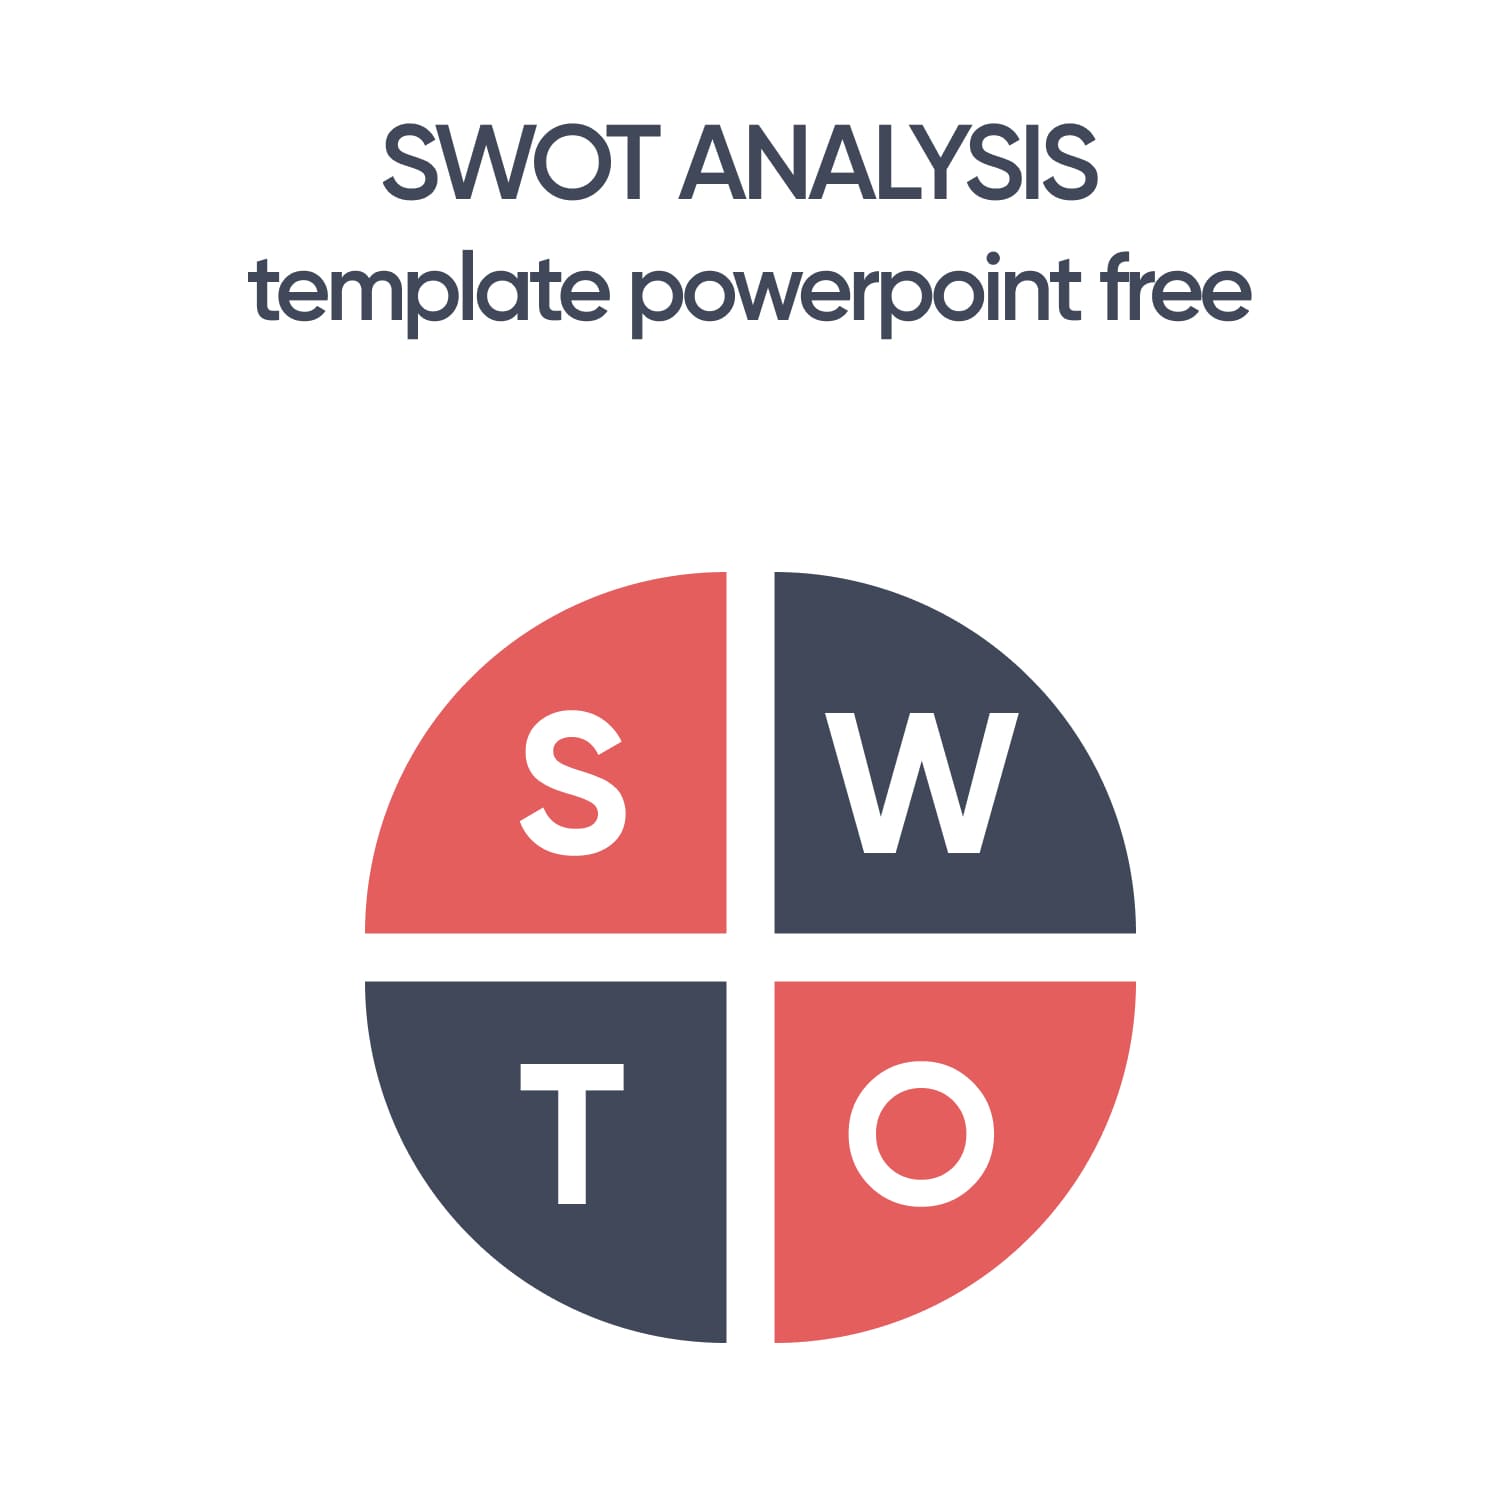 Preview SWOT Analysis Template Powerpoint.